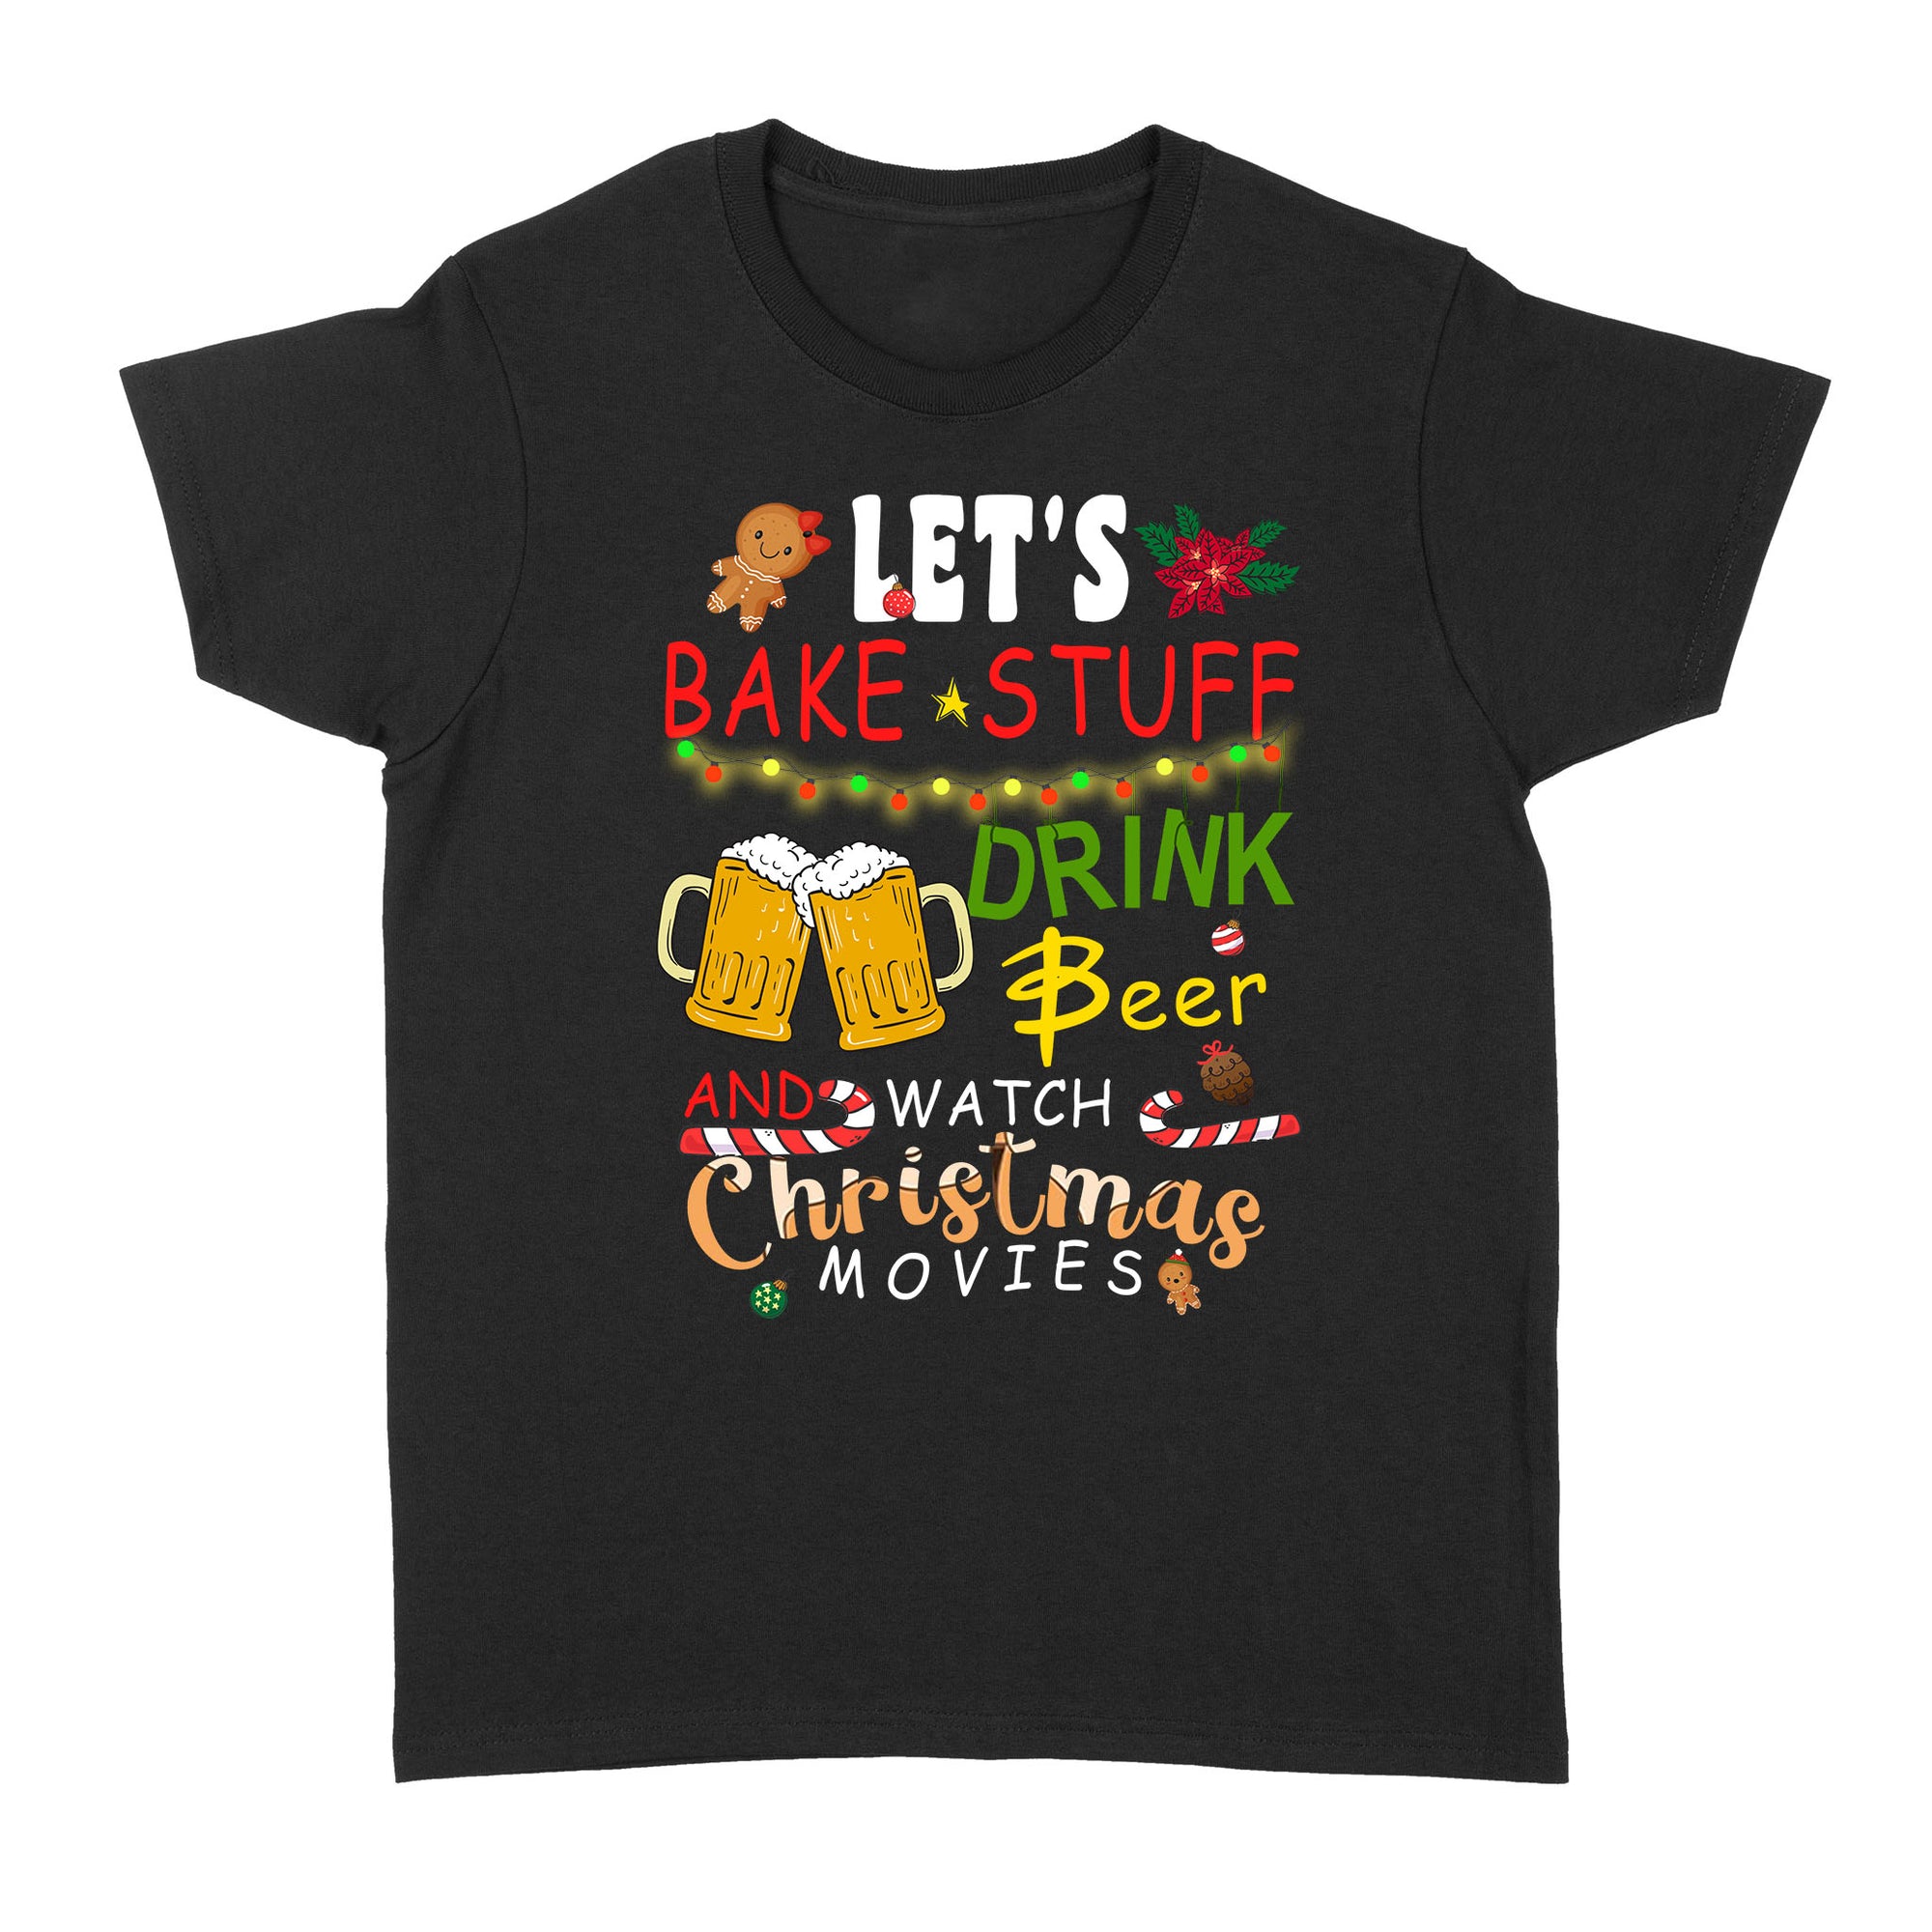 Funny Christmas Gifts Ideas Let's Bake Stuff Drink Beer And Watch Christmas Movies B - Standard Women's T-shirt